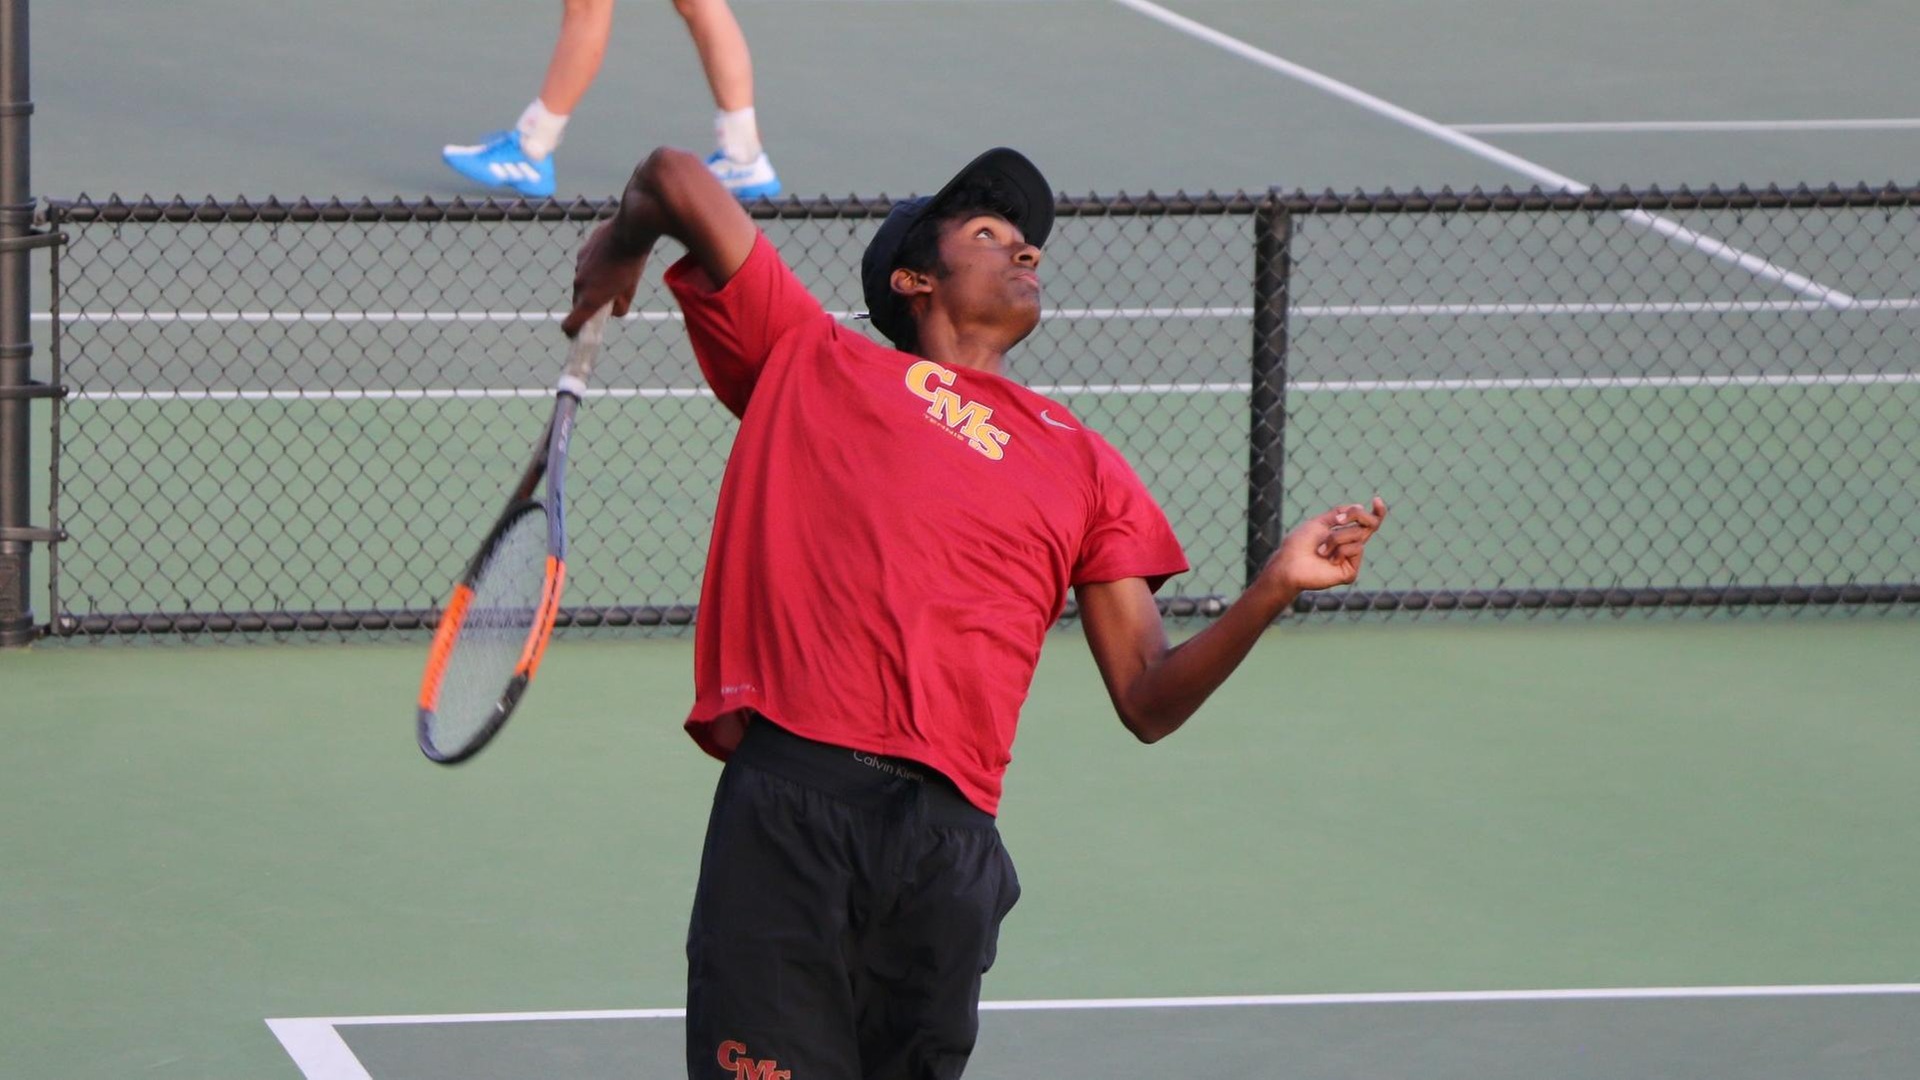 Advik Mareedu improved to 11-0 with two wins at No. 1 singles